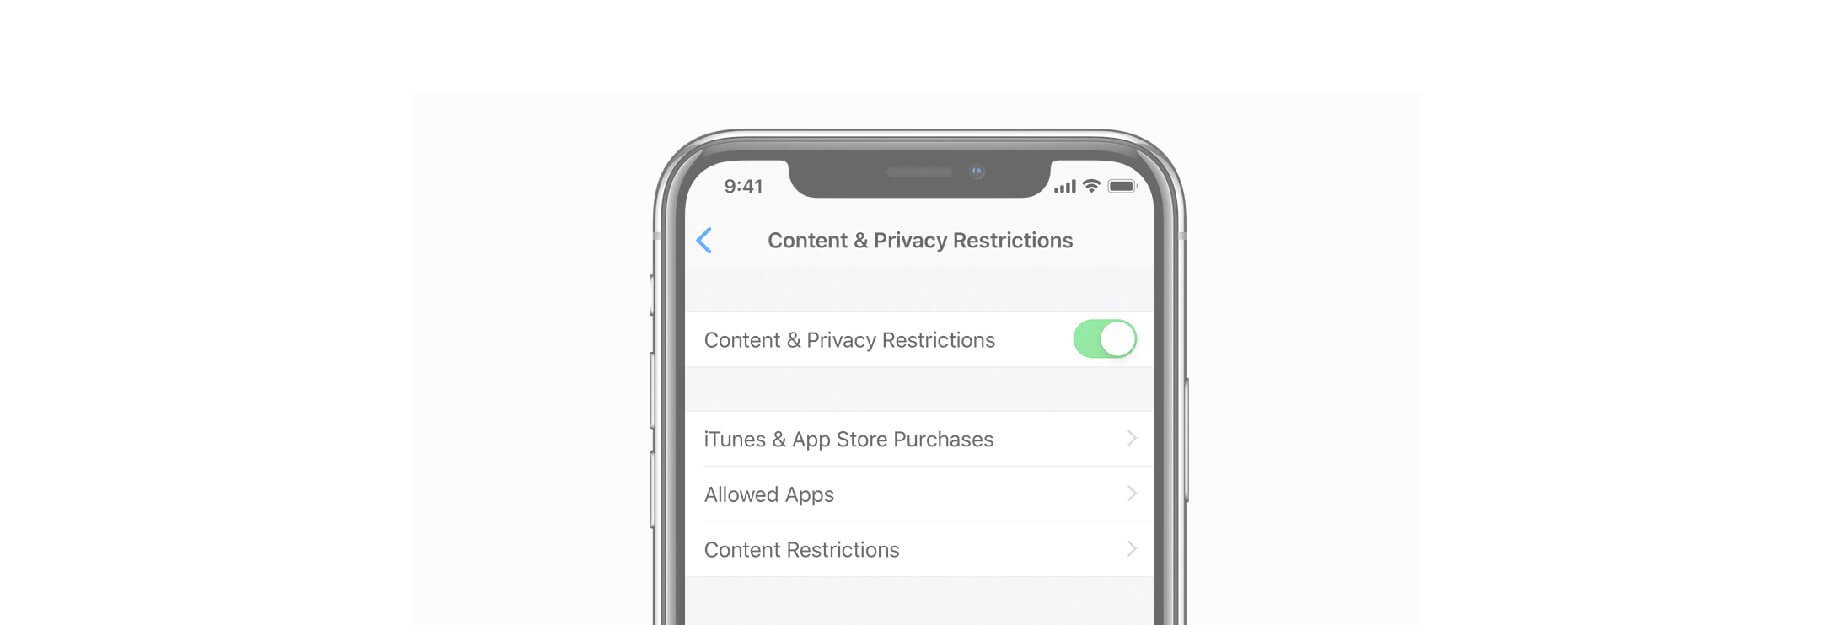 How to use parental controls on your iPhone or iPad